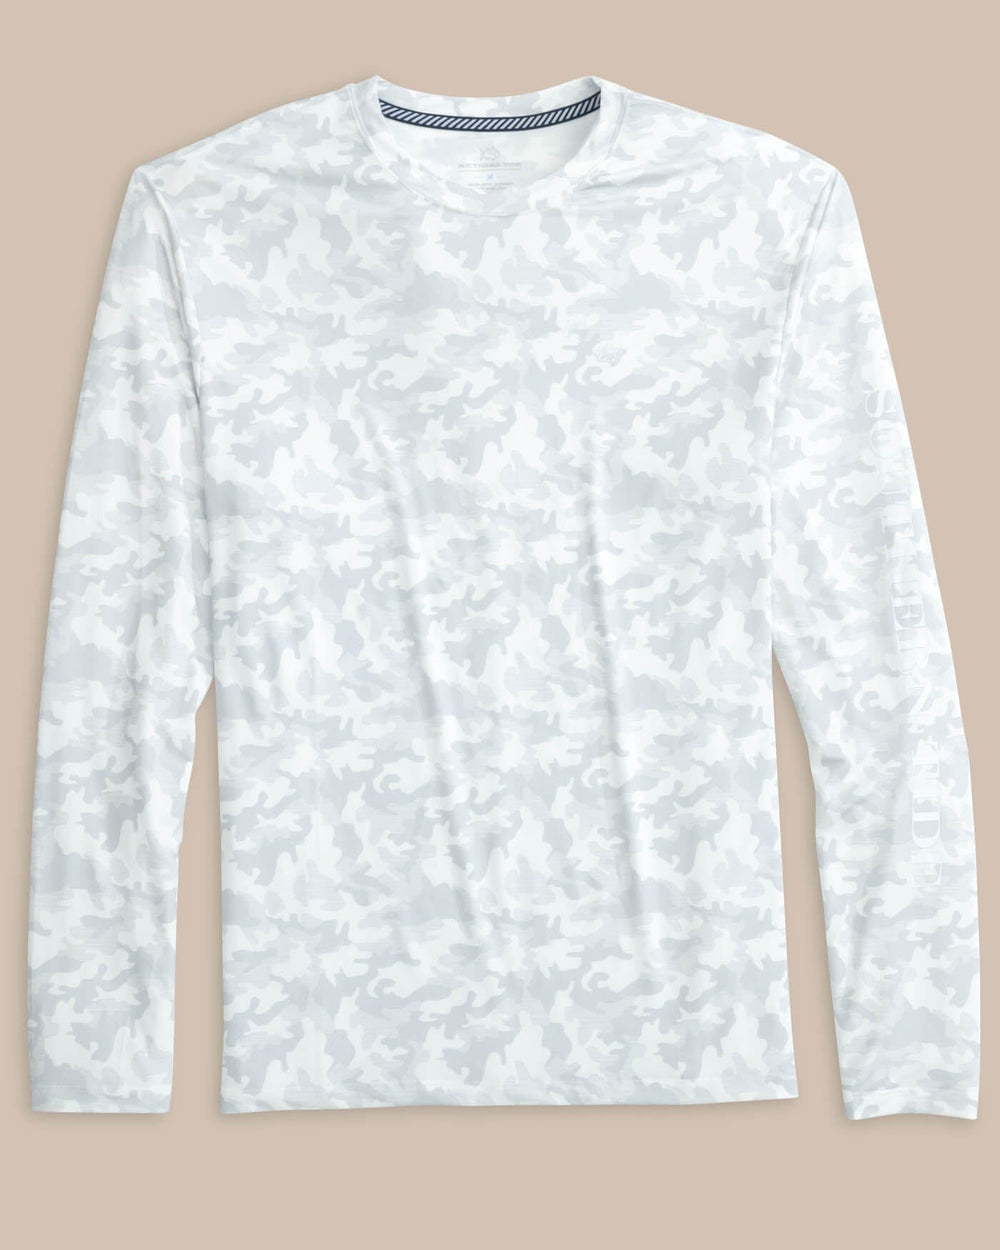 The front view of the Southern Tide Island Camo Long Sleeve Performance T-shirt by Southern Tide - Classic White